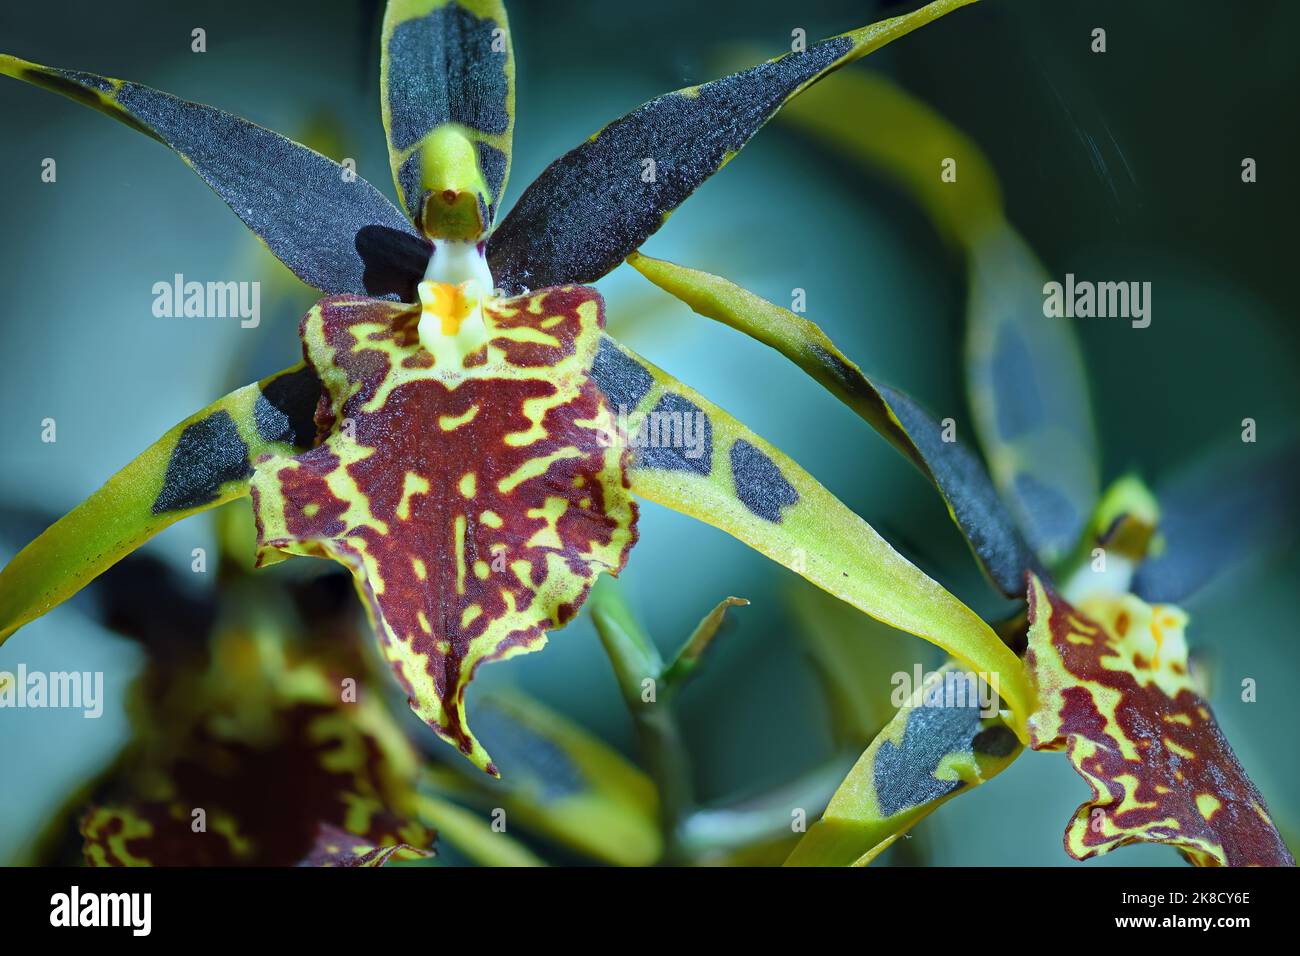 Yellow and Black Spider Orchid close up Stock Photo